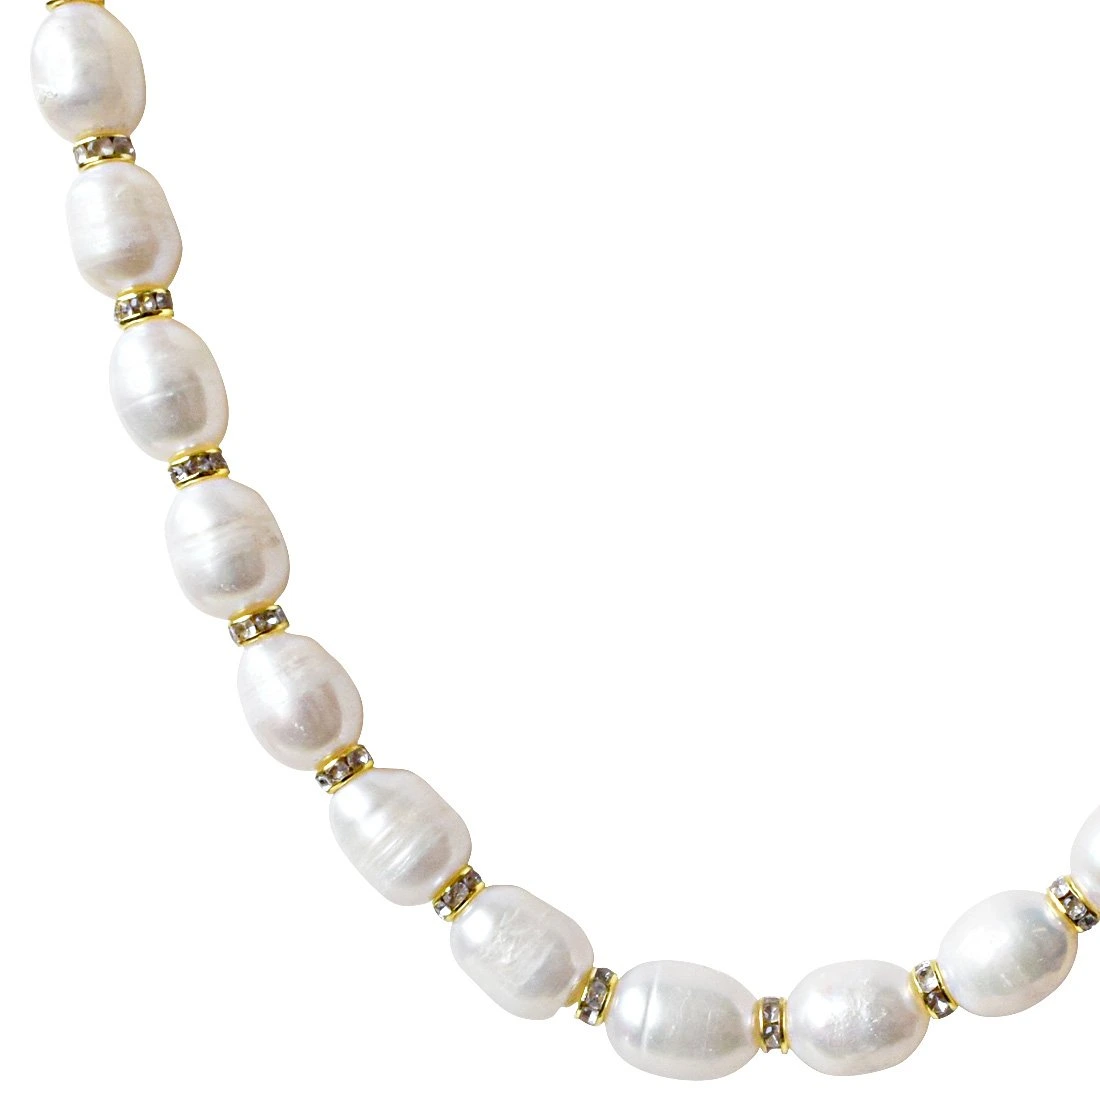 Single Line Real Big Elongated Pearl Necklace for Women (SN918)